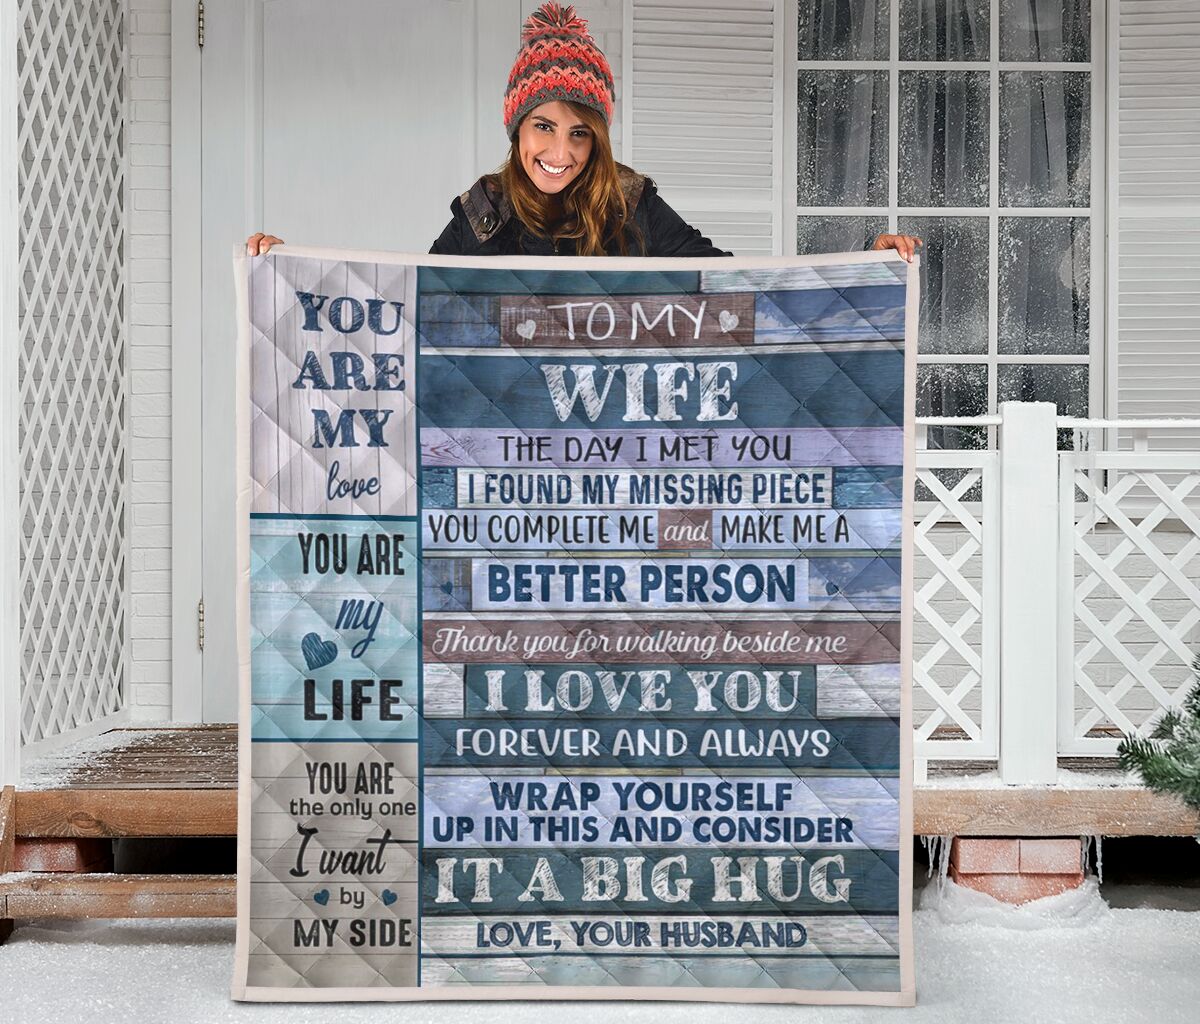 To my wife love your husband quilt blanket